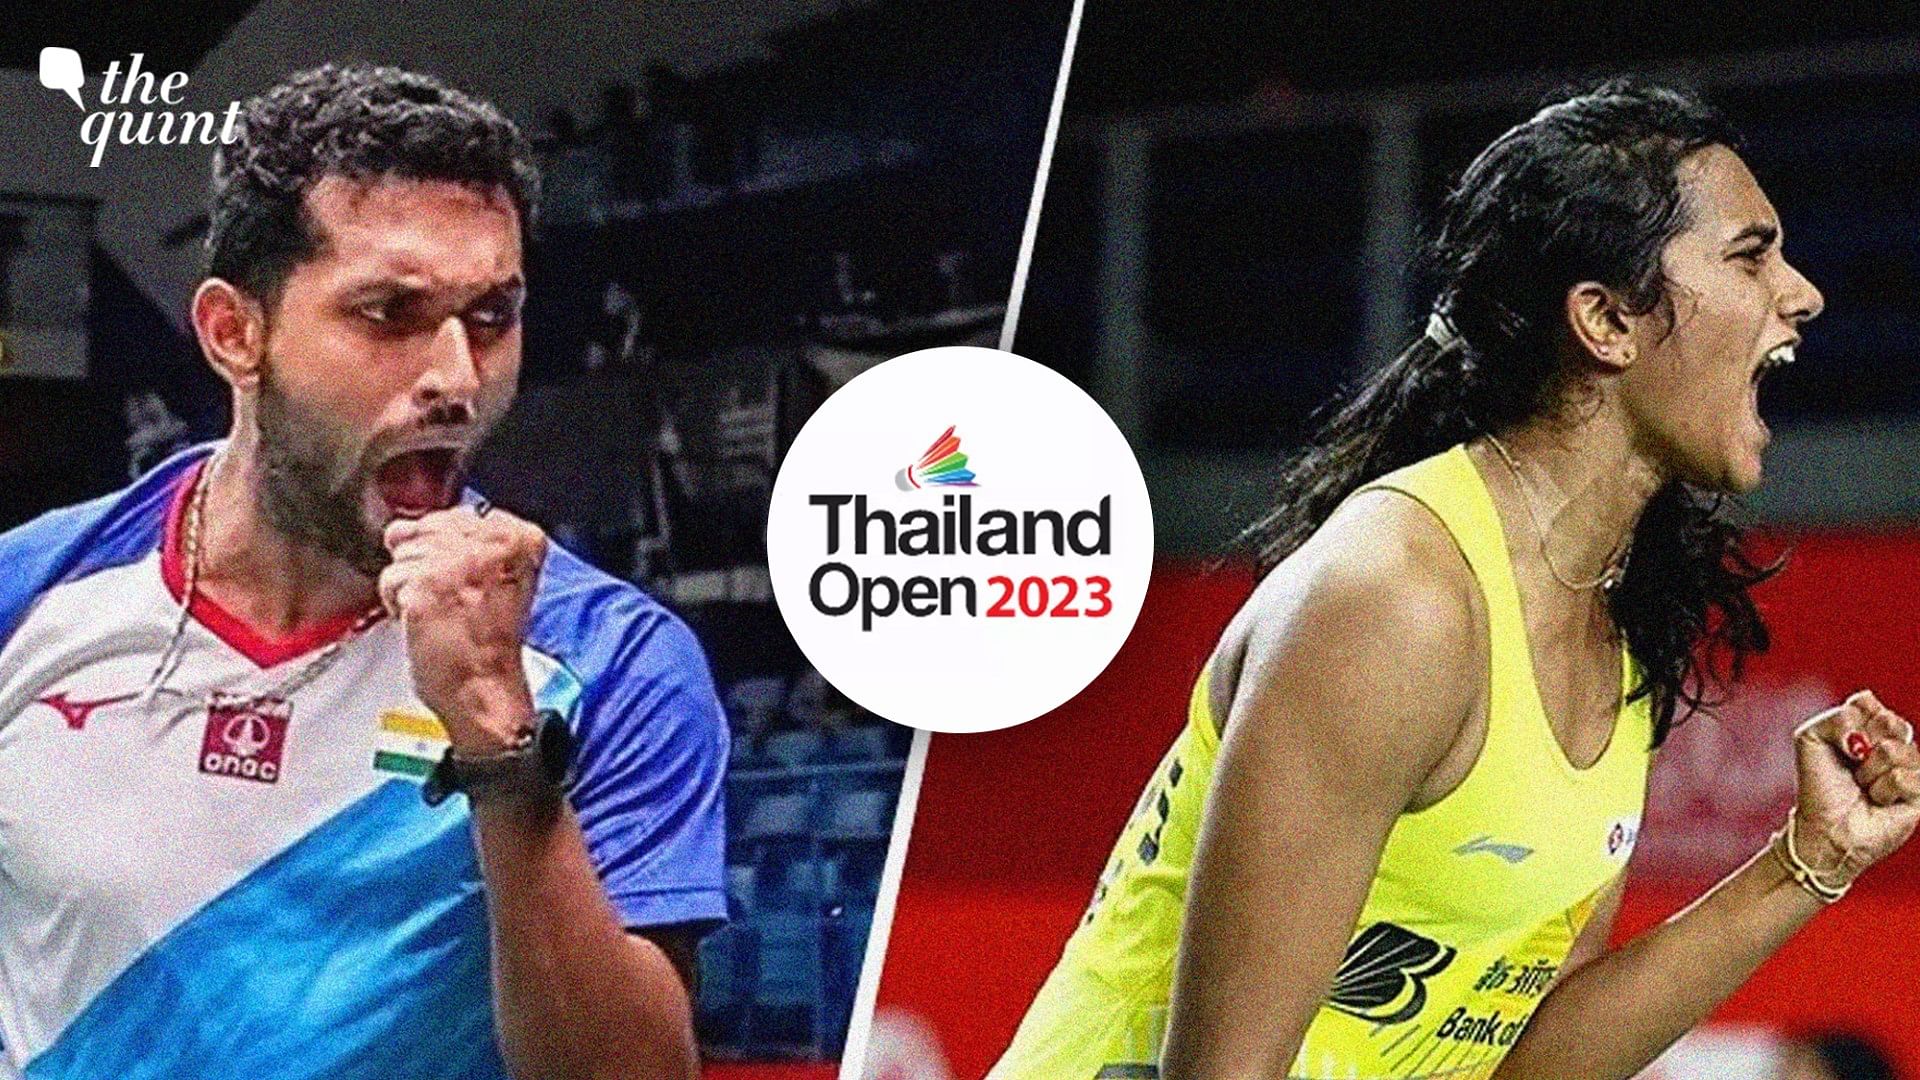 Thailand Open 2023 Badminton Tournament Starts Today on Tuesday, 30 May 2023 in Bangkok; Live Streaming and Telecast Details Here